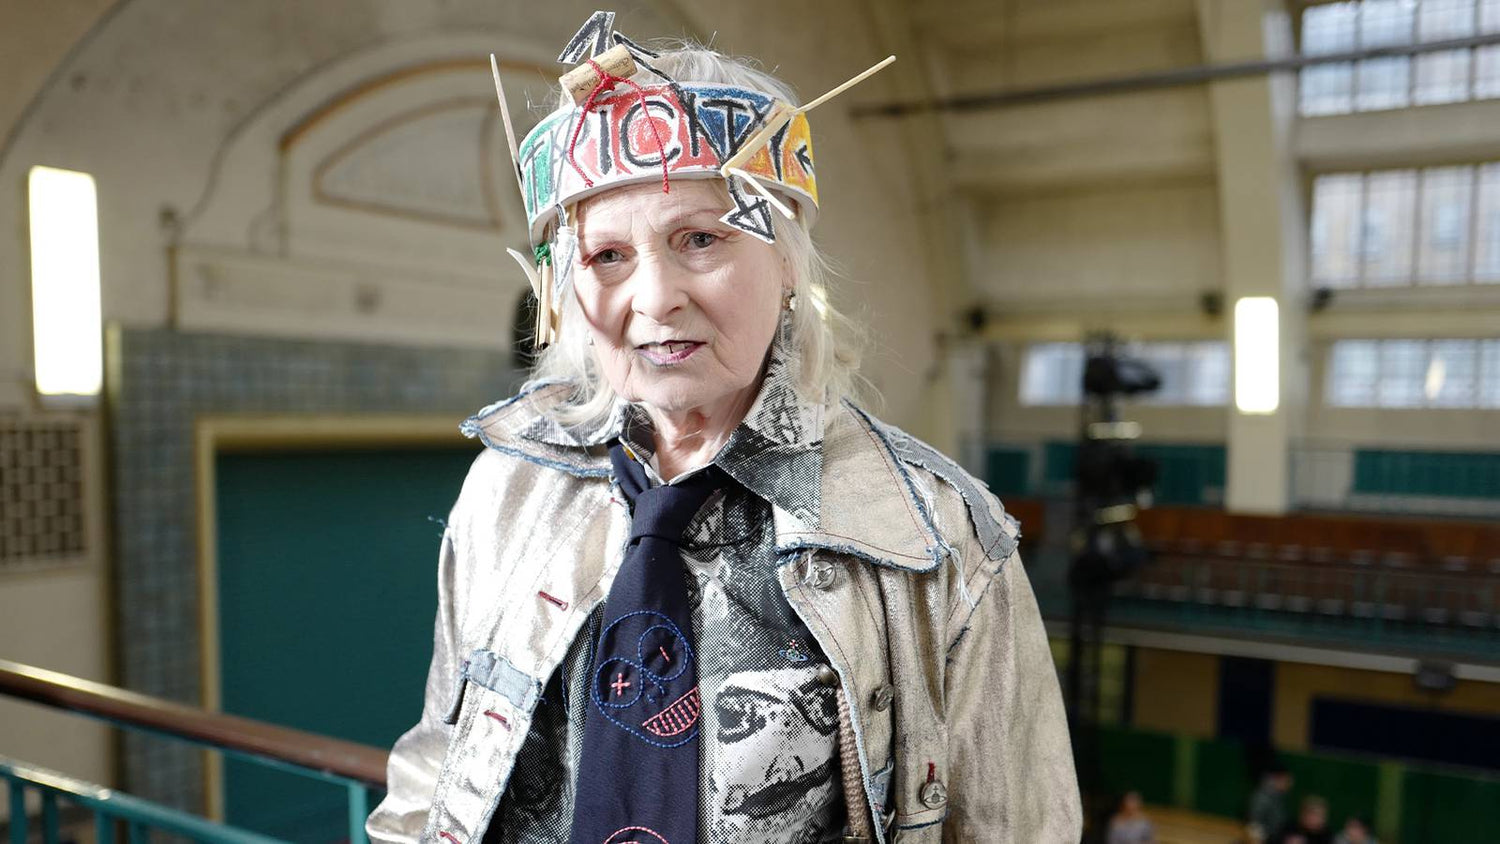 5 Things to Learn from Vivienne Westwood Related to Sustainability